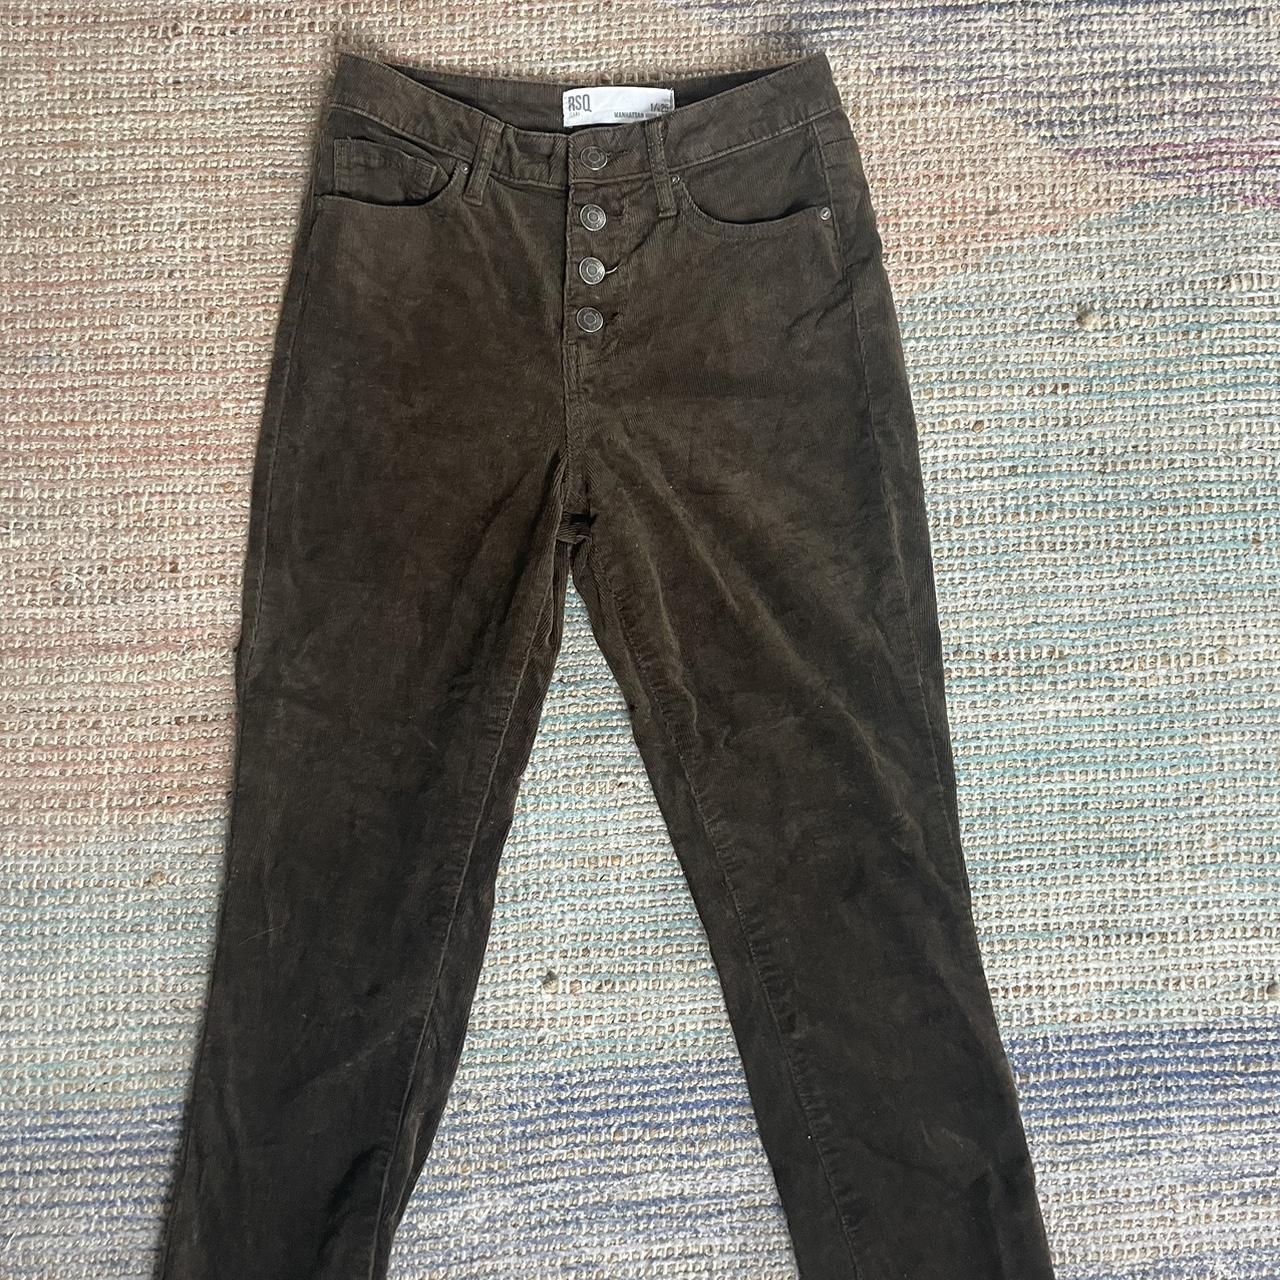 RSQ brown corduroy high waisted pants. Size 1/25”. - Depop